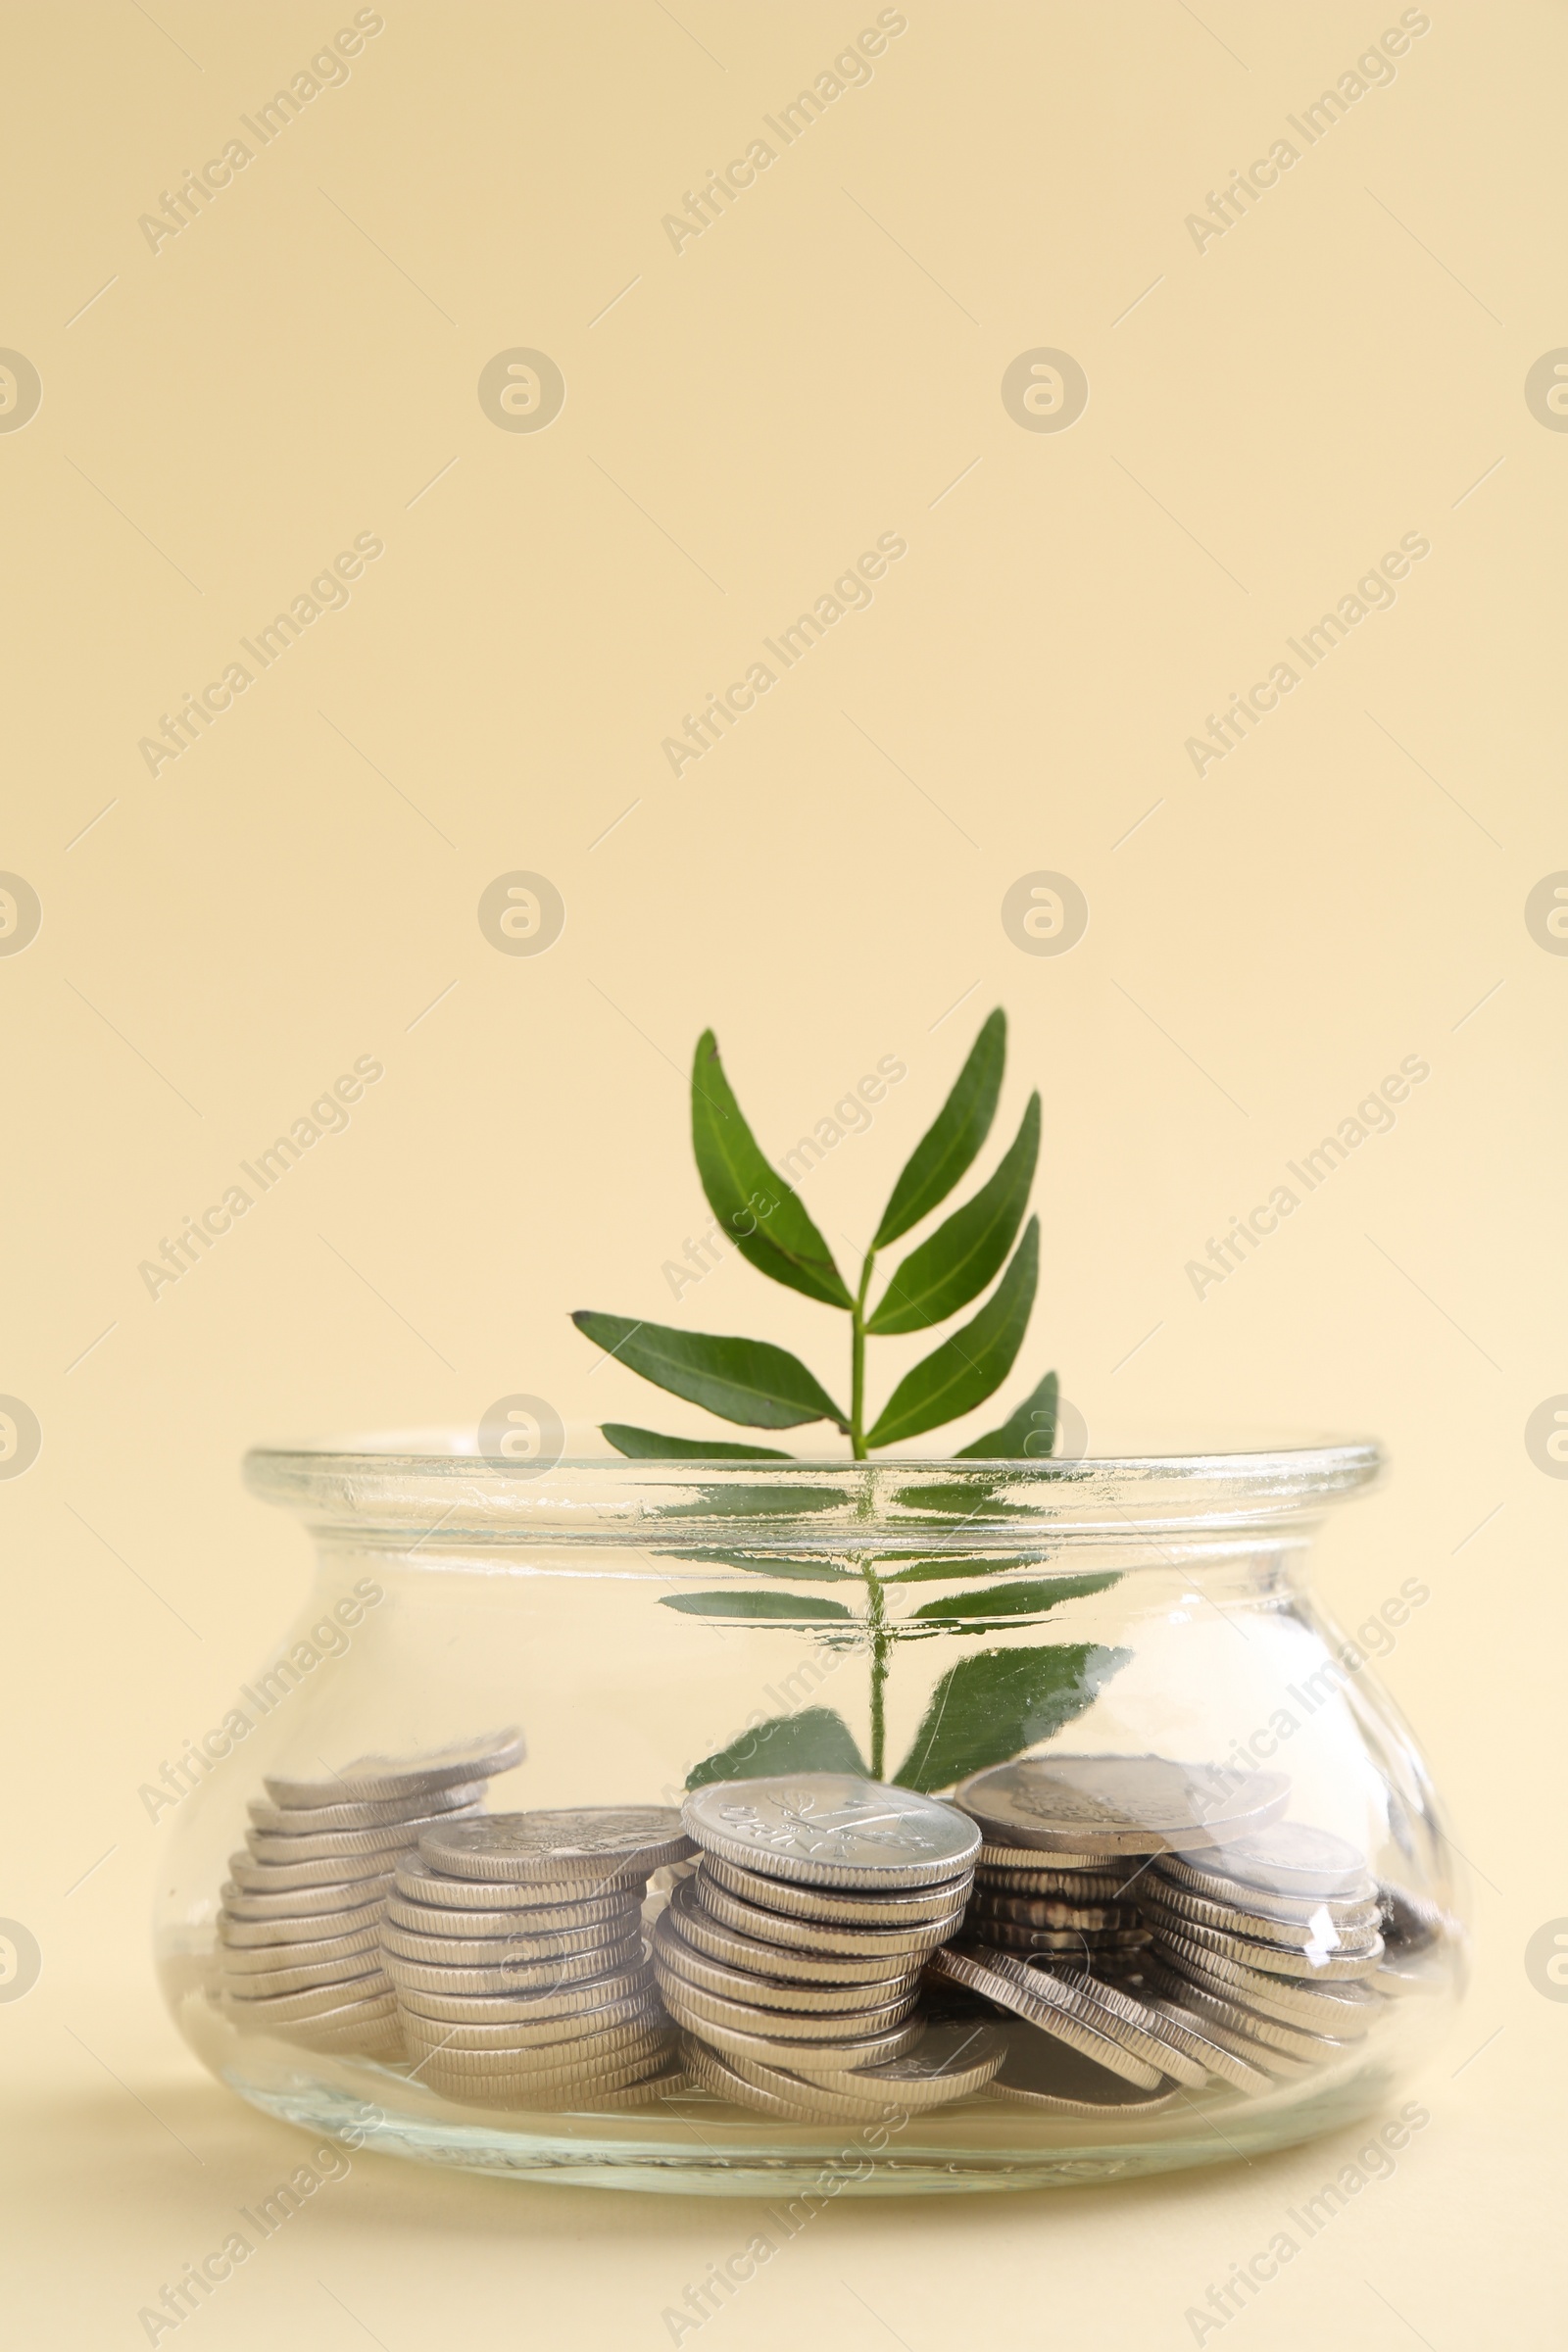 Photo of Financial savings. Coins and twig in glass jar on beige background